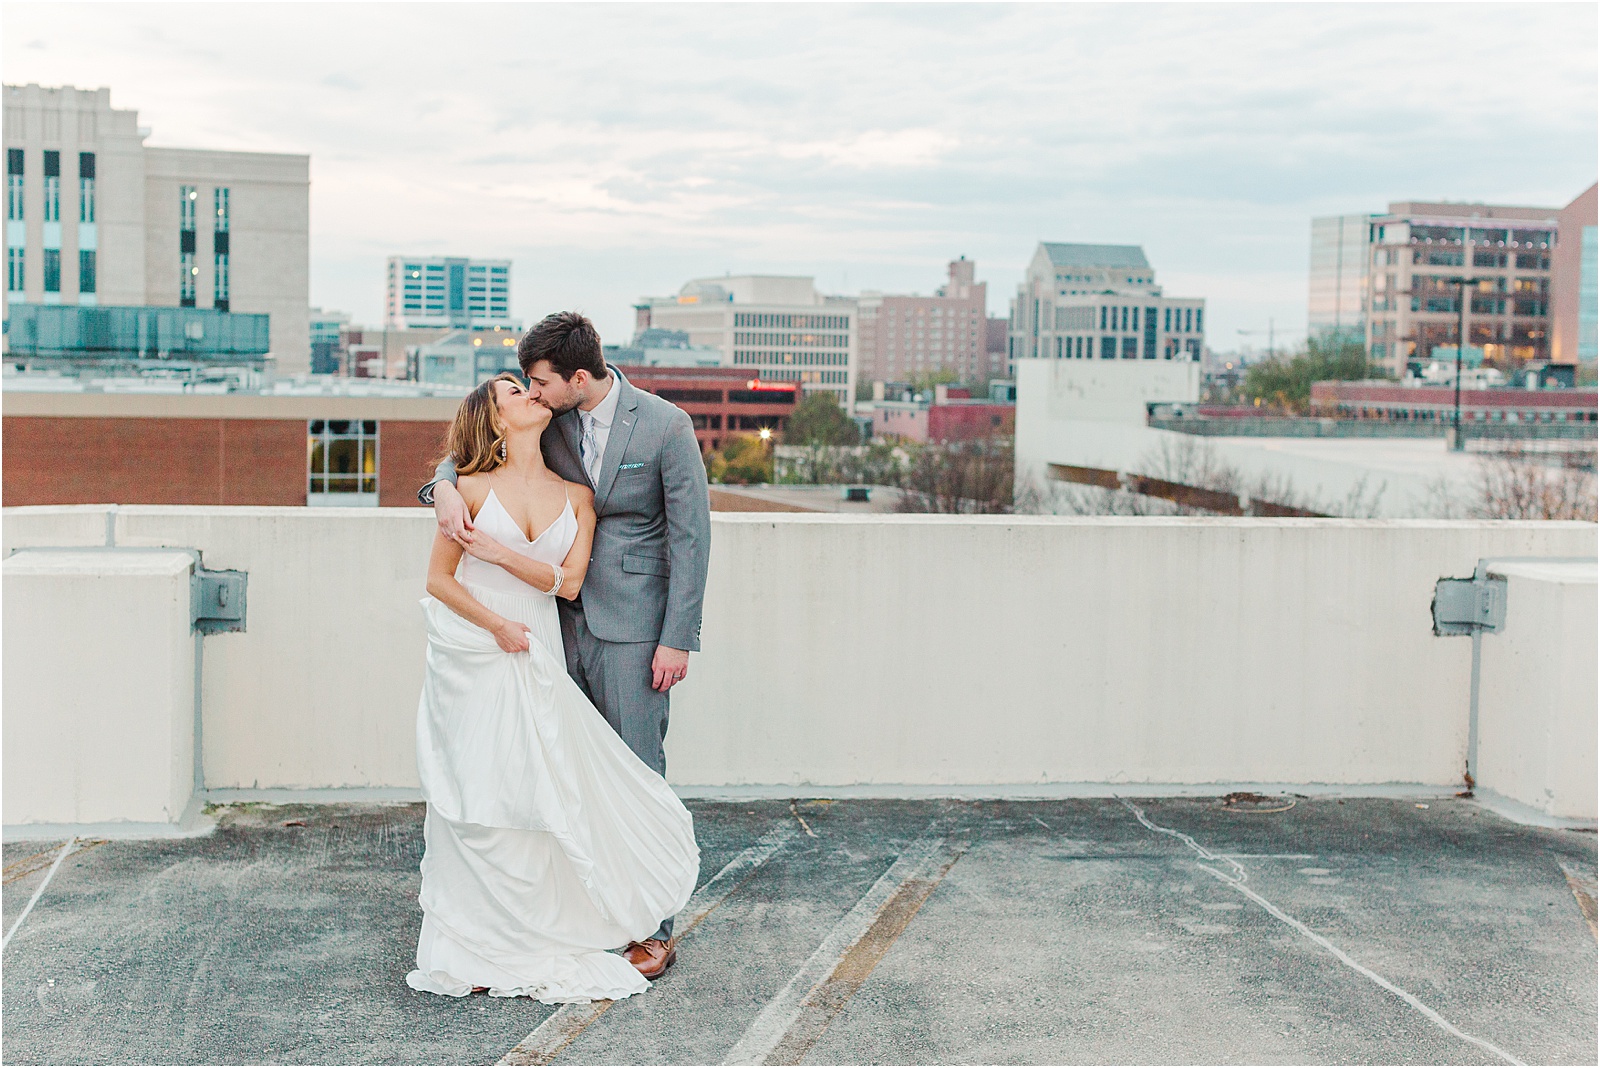 Groom has arm around bride kissing with greenville city in background